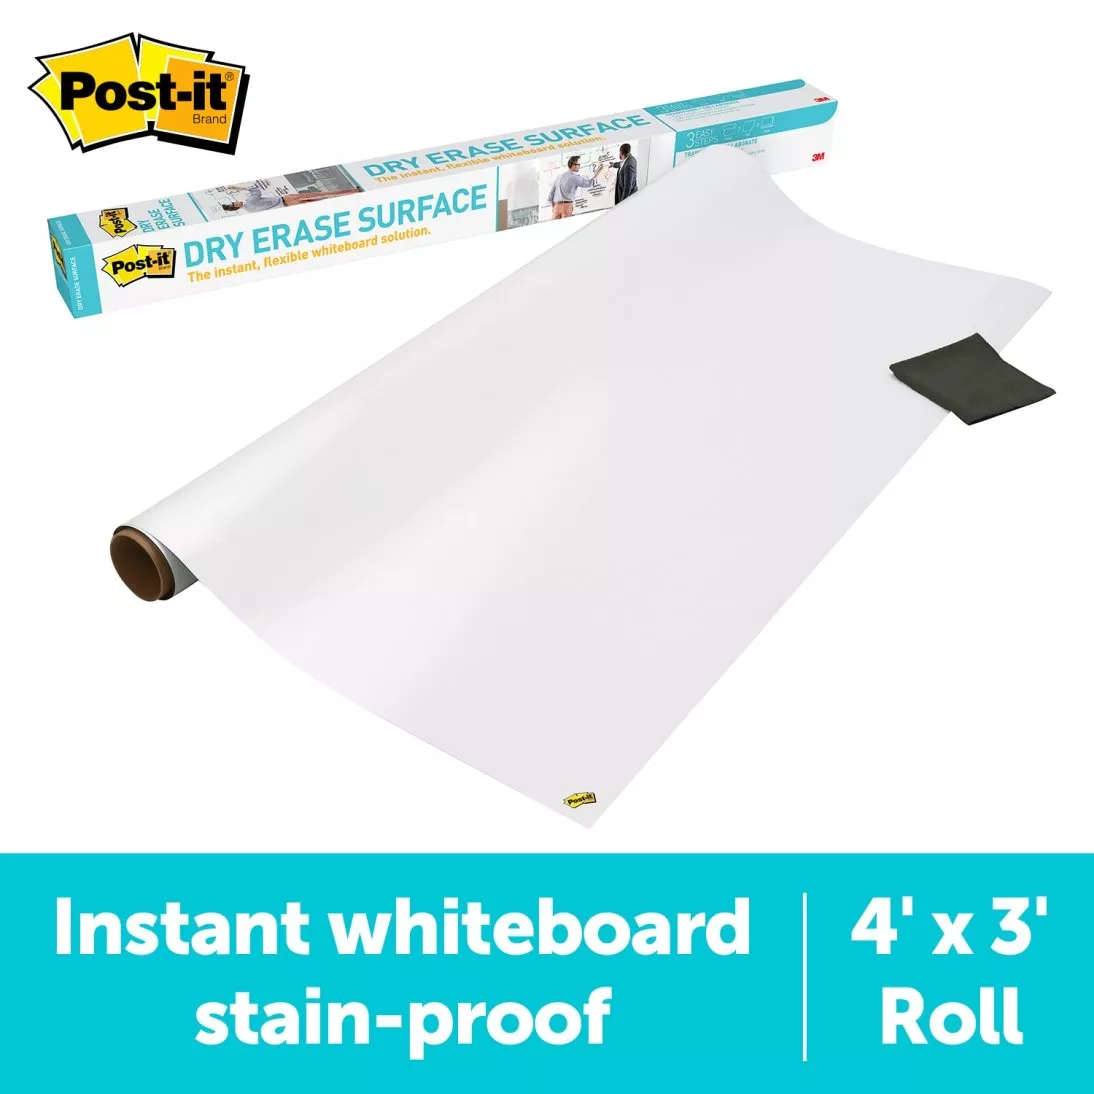 Post-it® Super Sticky Dry Erase Surface DEF4x3, 3 ft x 4 ft (91.4 cm x
1.21 m)